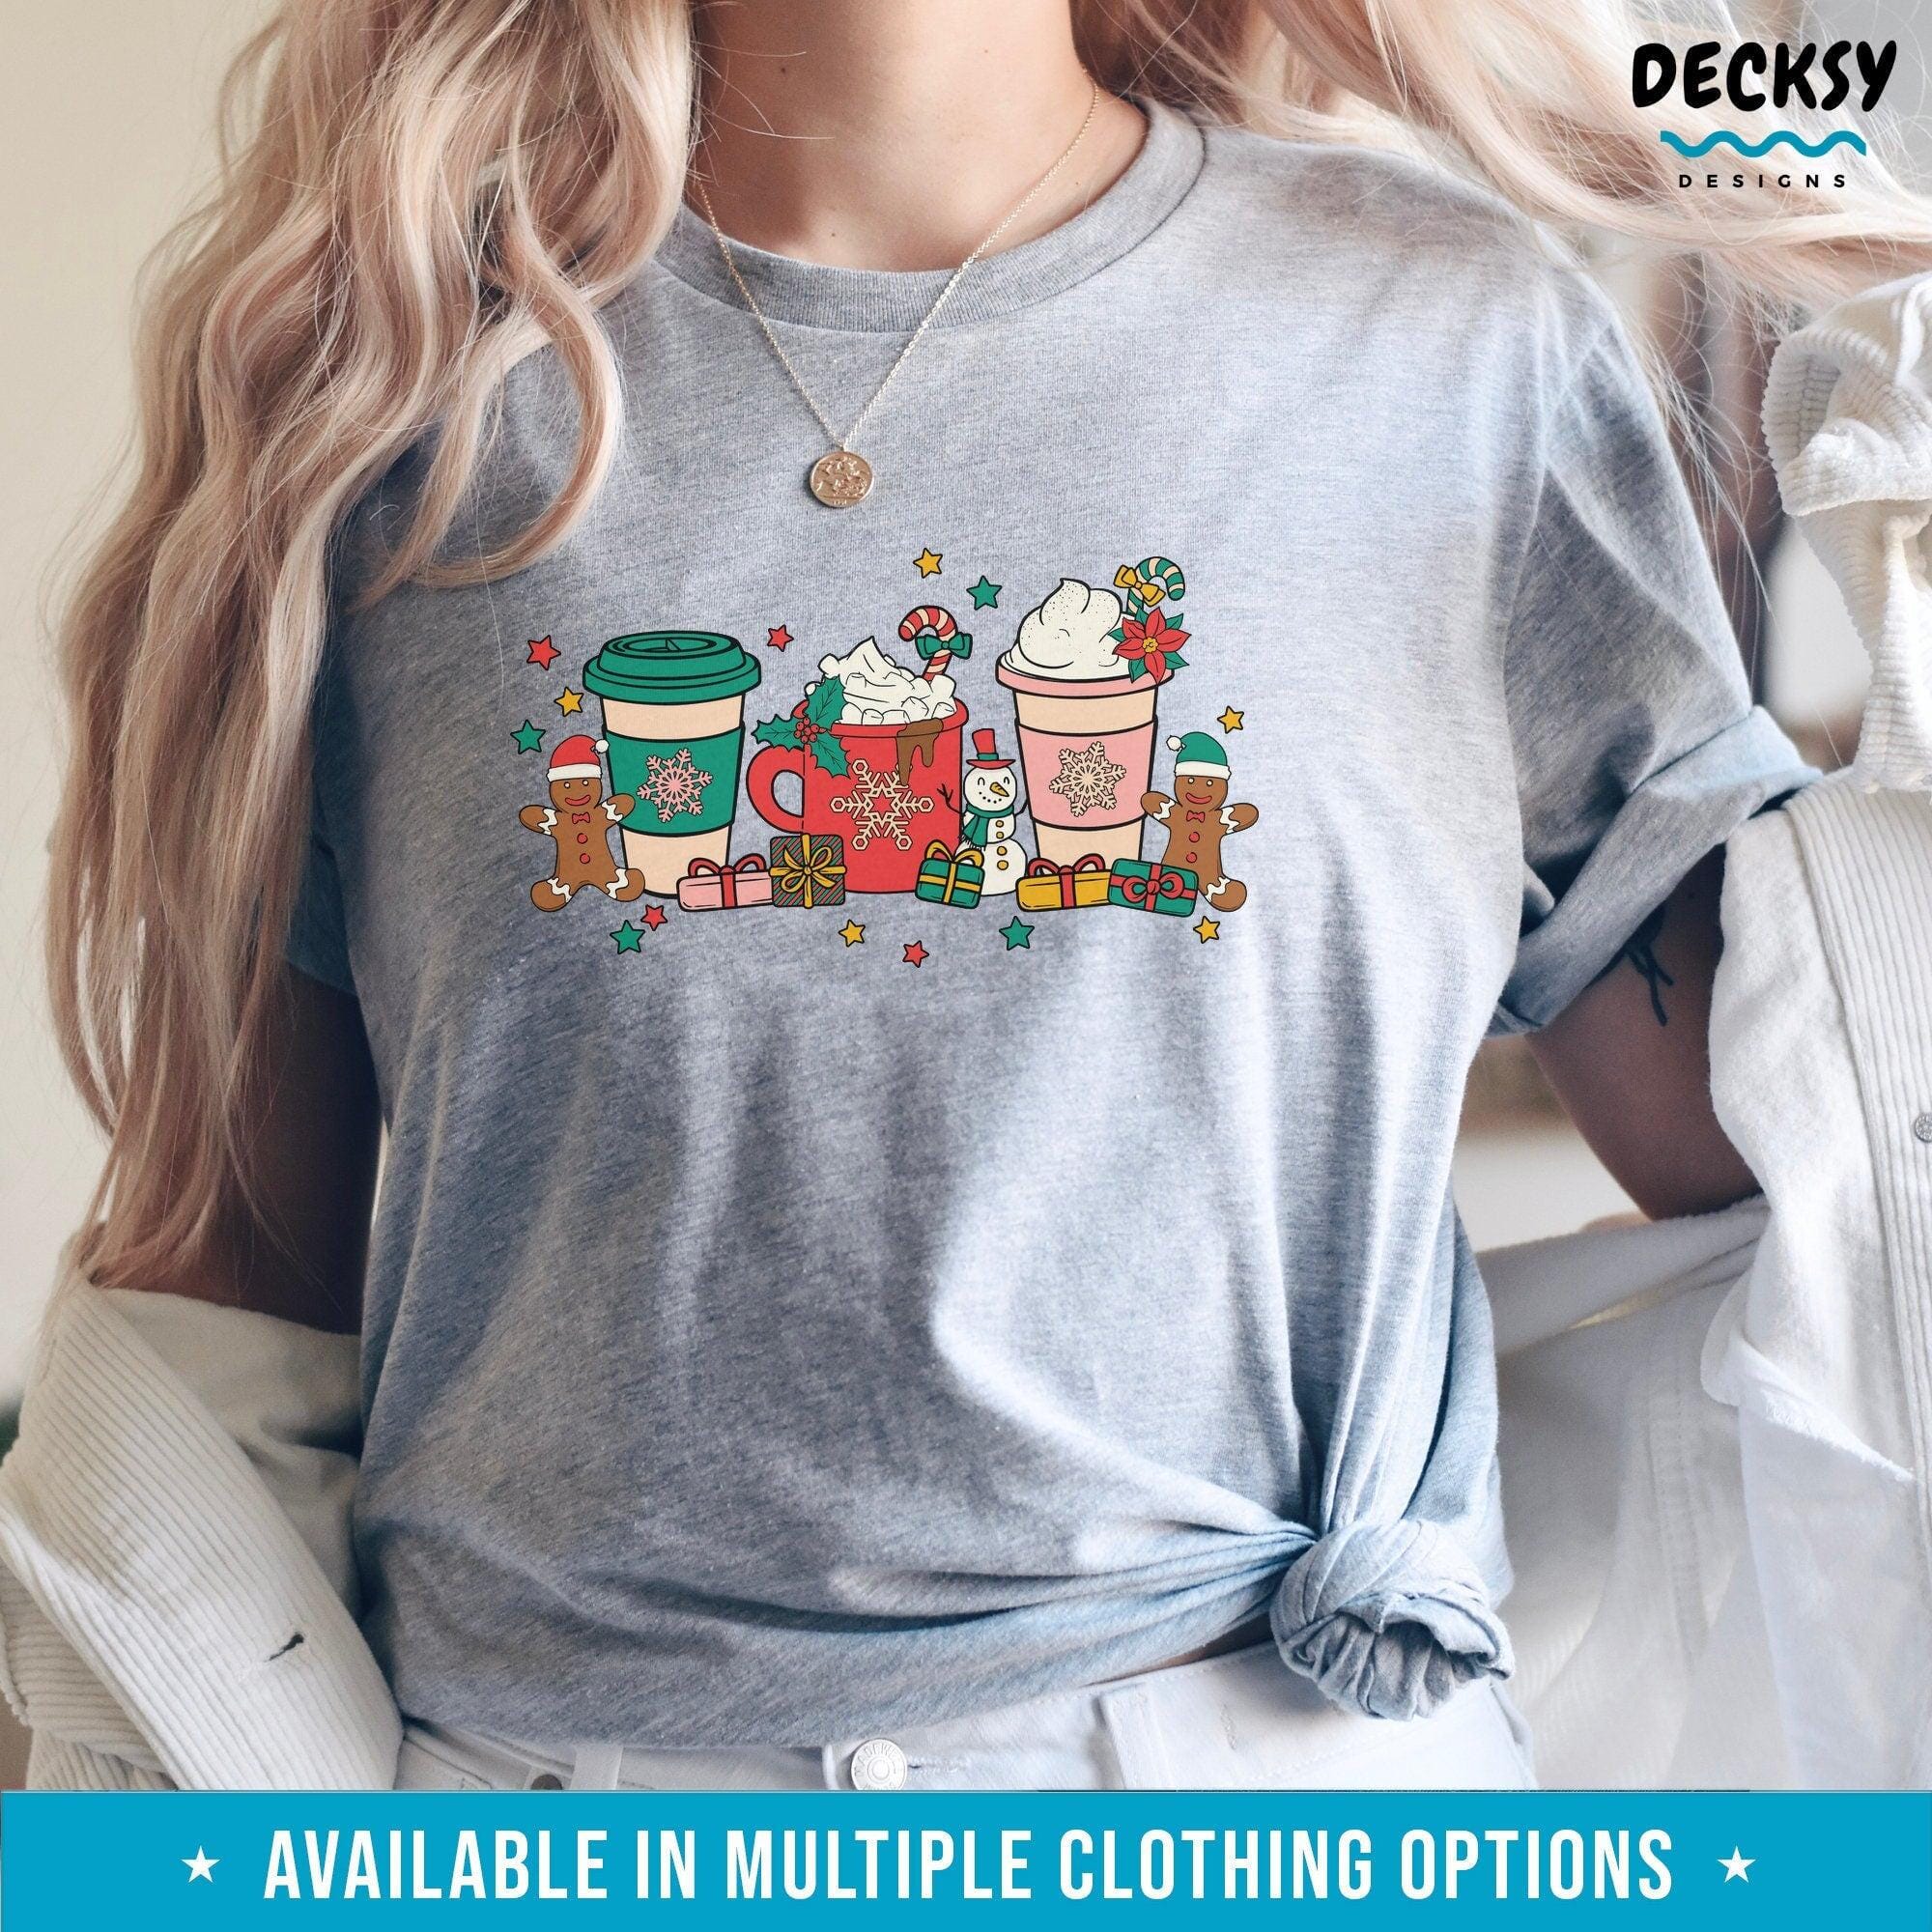 Christmas Coffee Shirt, Xmas Holiday Sweatshirt Hoodie, Gift for Coffee Lover-Clothing:Gender-Neutral Adult Clothing:Tops & Tees:T-shirts:Graphic Tees-DecksyDesigns